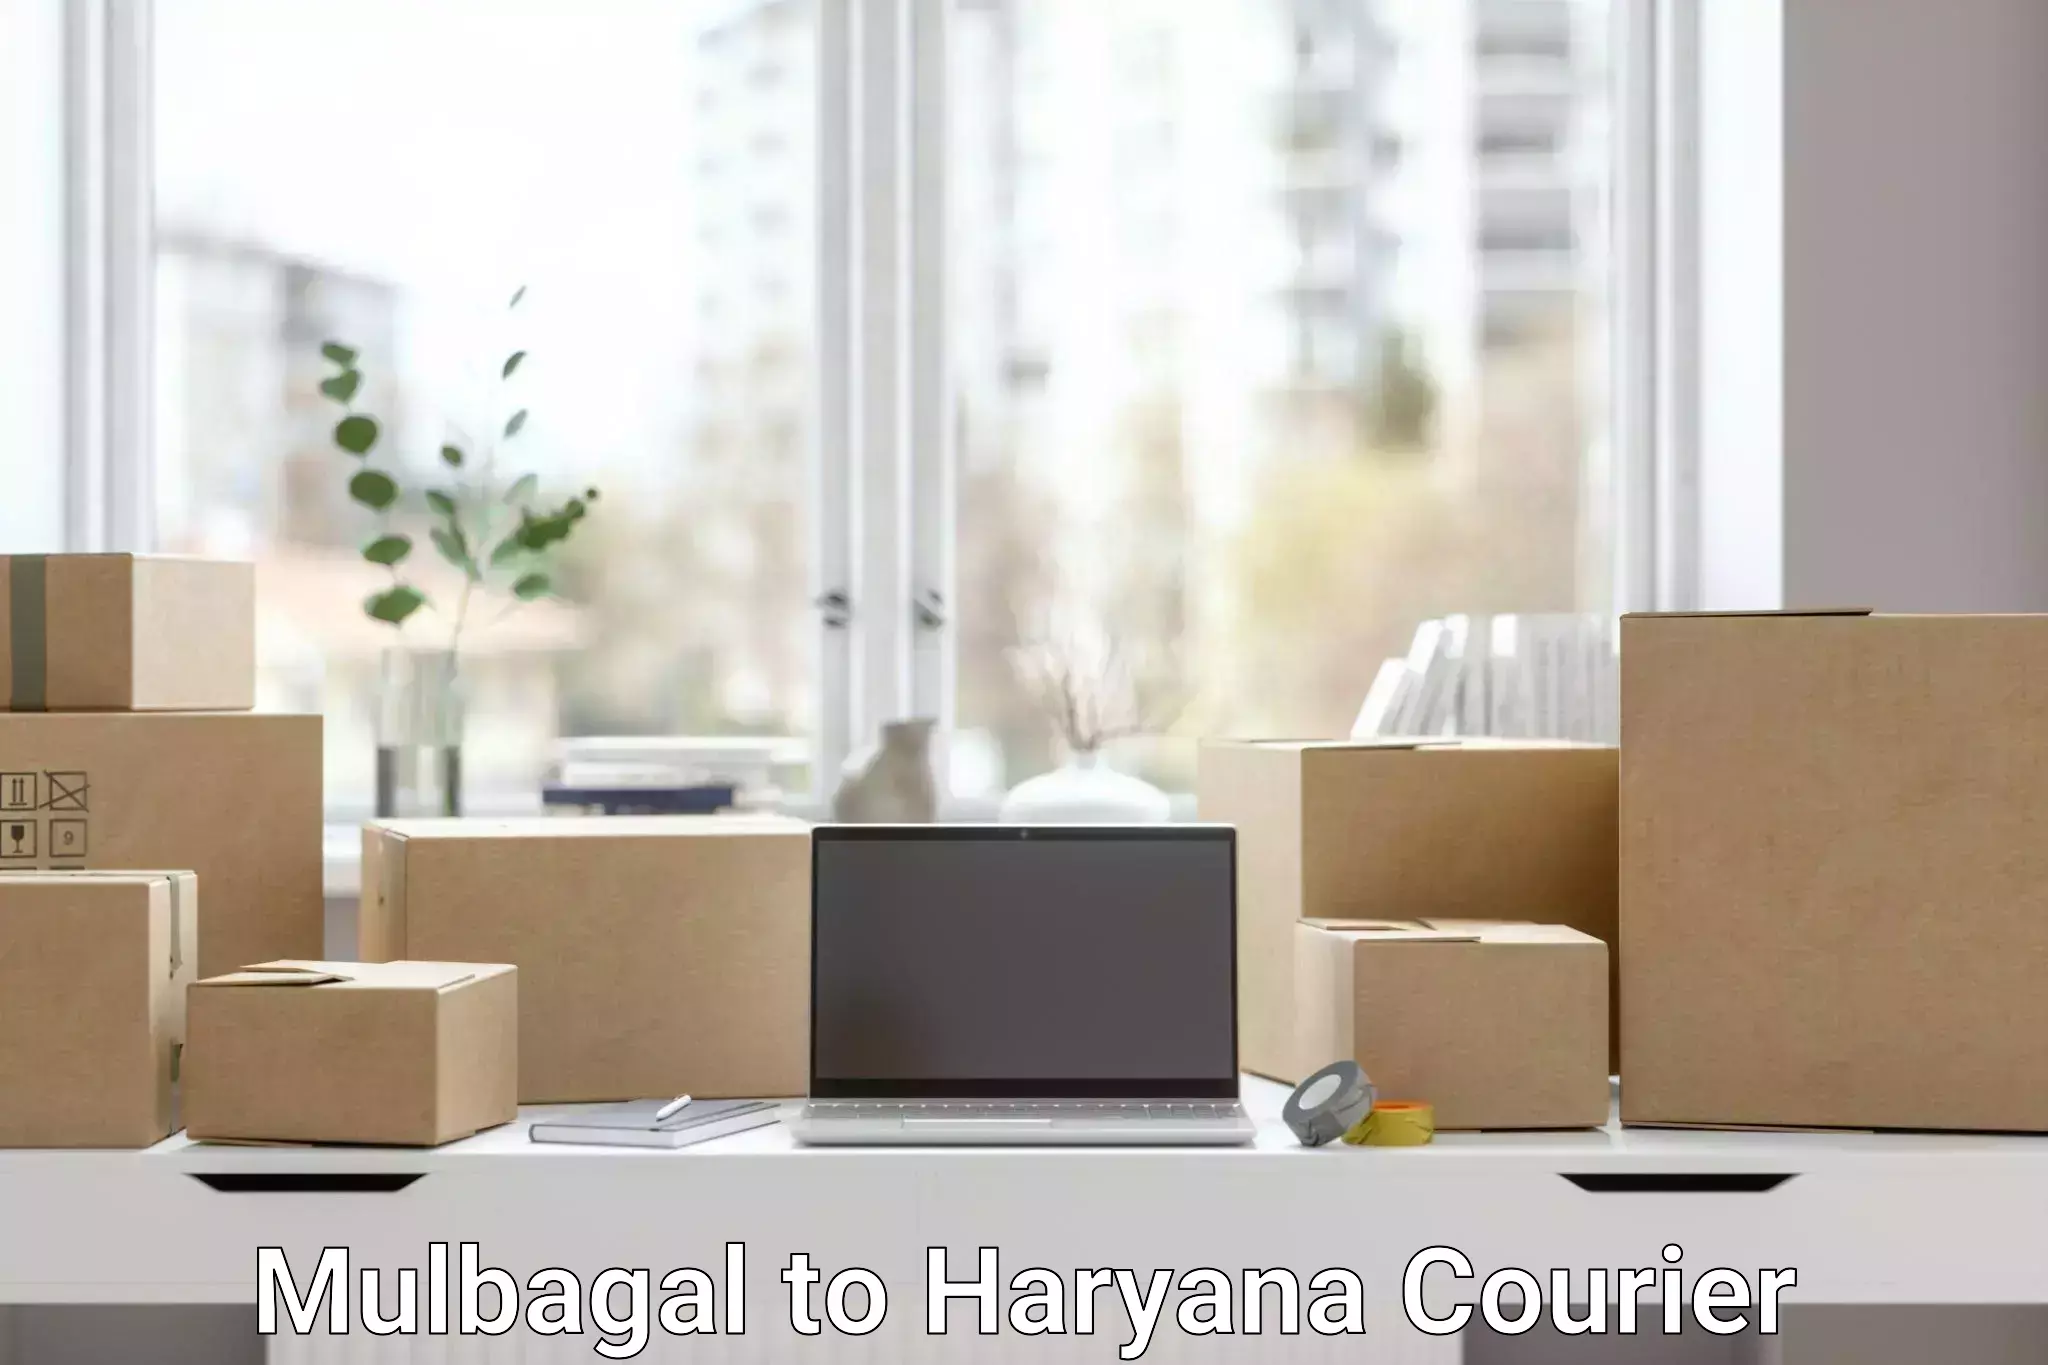 Streamlined delivery processes in Mulbagal to Gurgaon